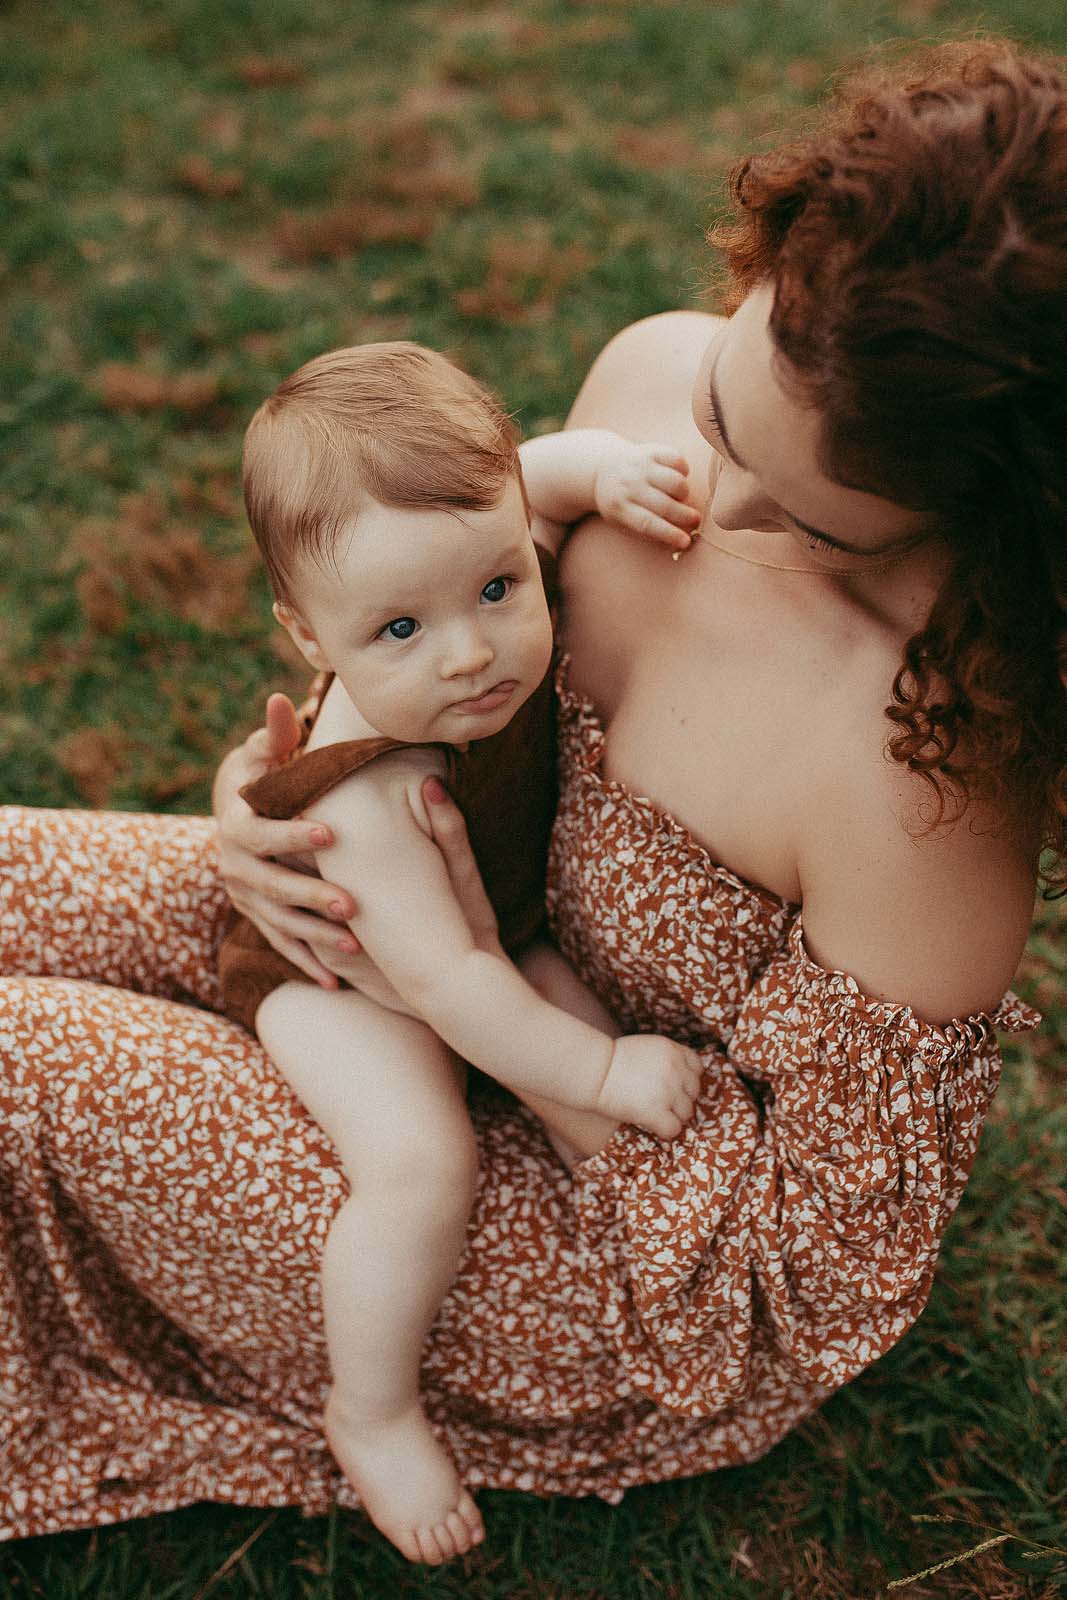 The mother with long red hair and baby play on the grass. The baby is showing his tongue and the mother is smiling. Photo session took place near A Woman's Place in Fayetteville, NC. Photographer - Victoria Vasilyeva Photograthy.